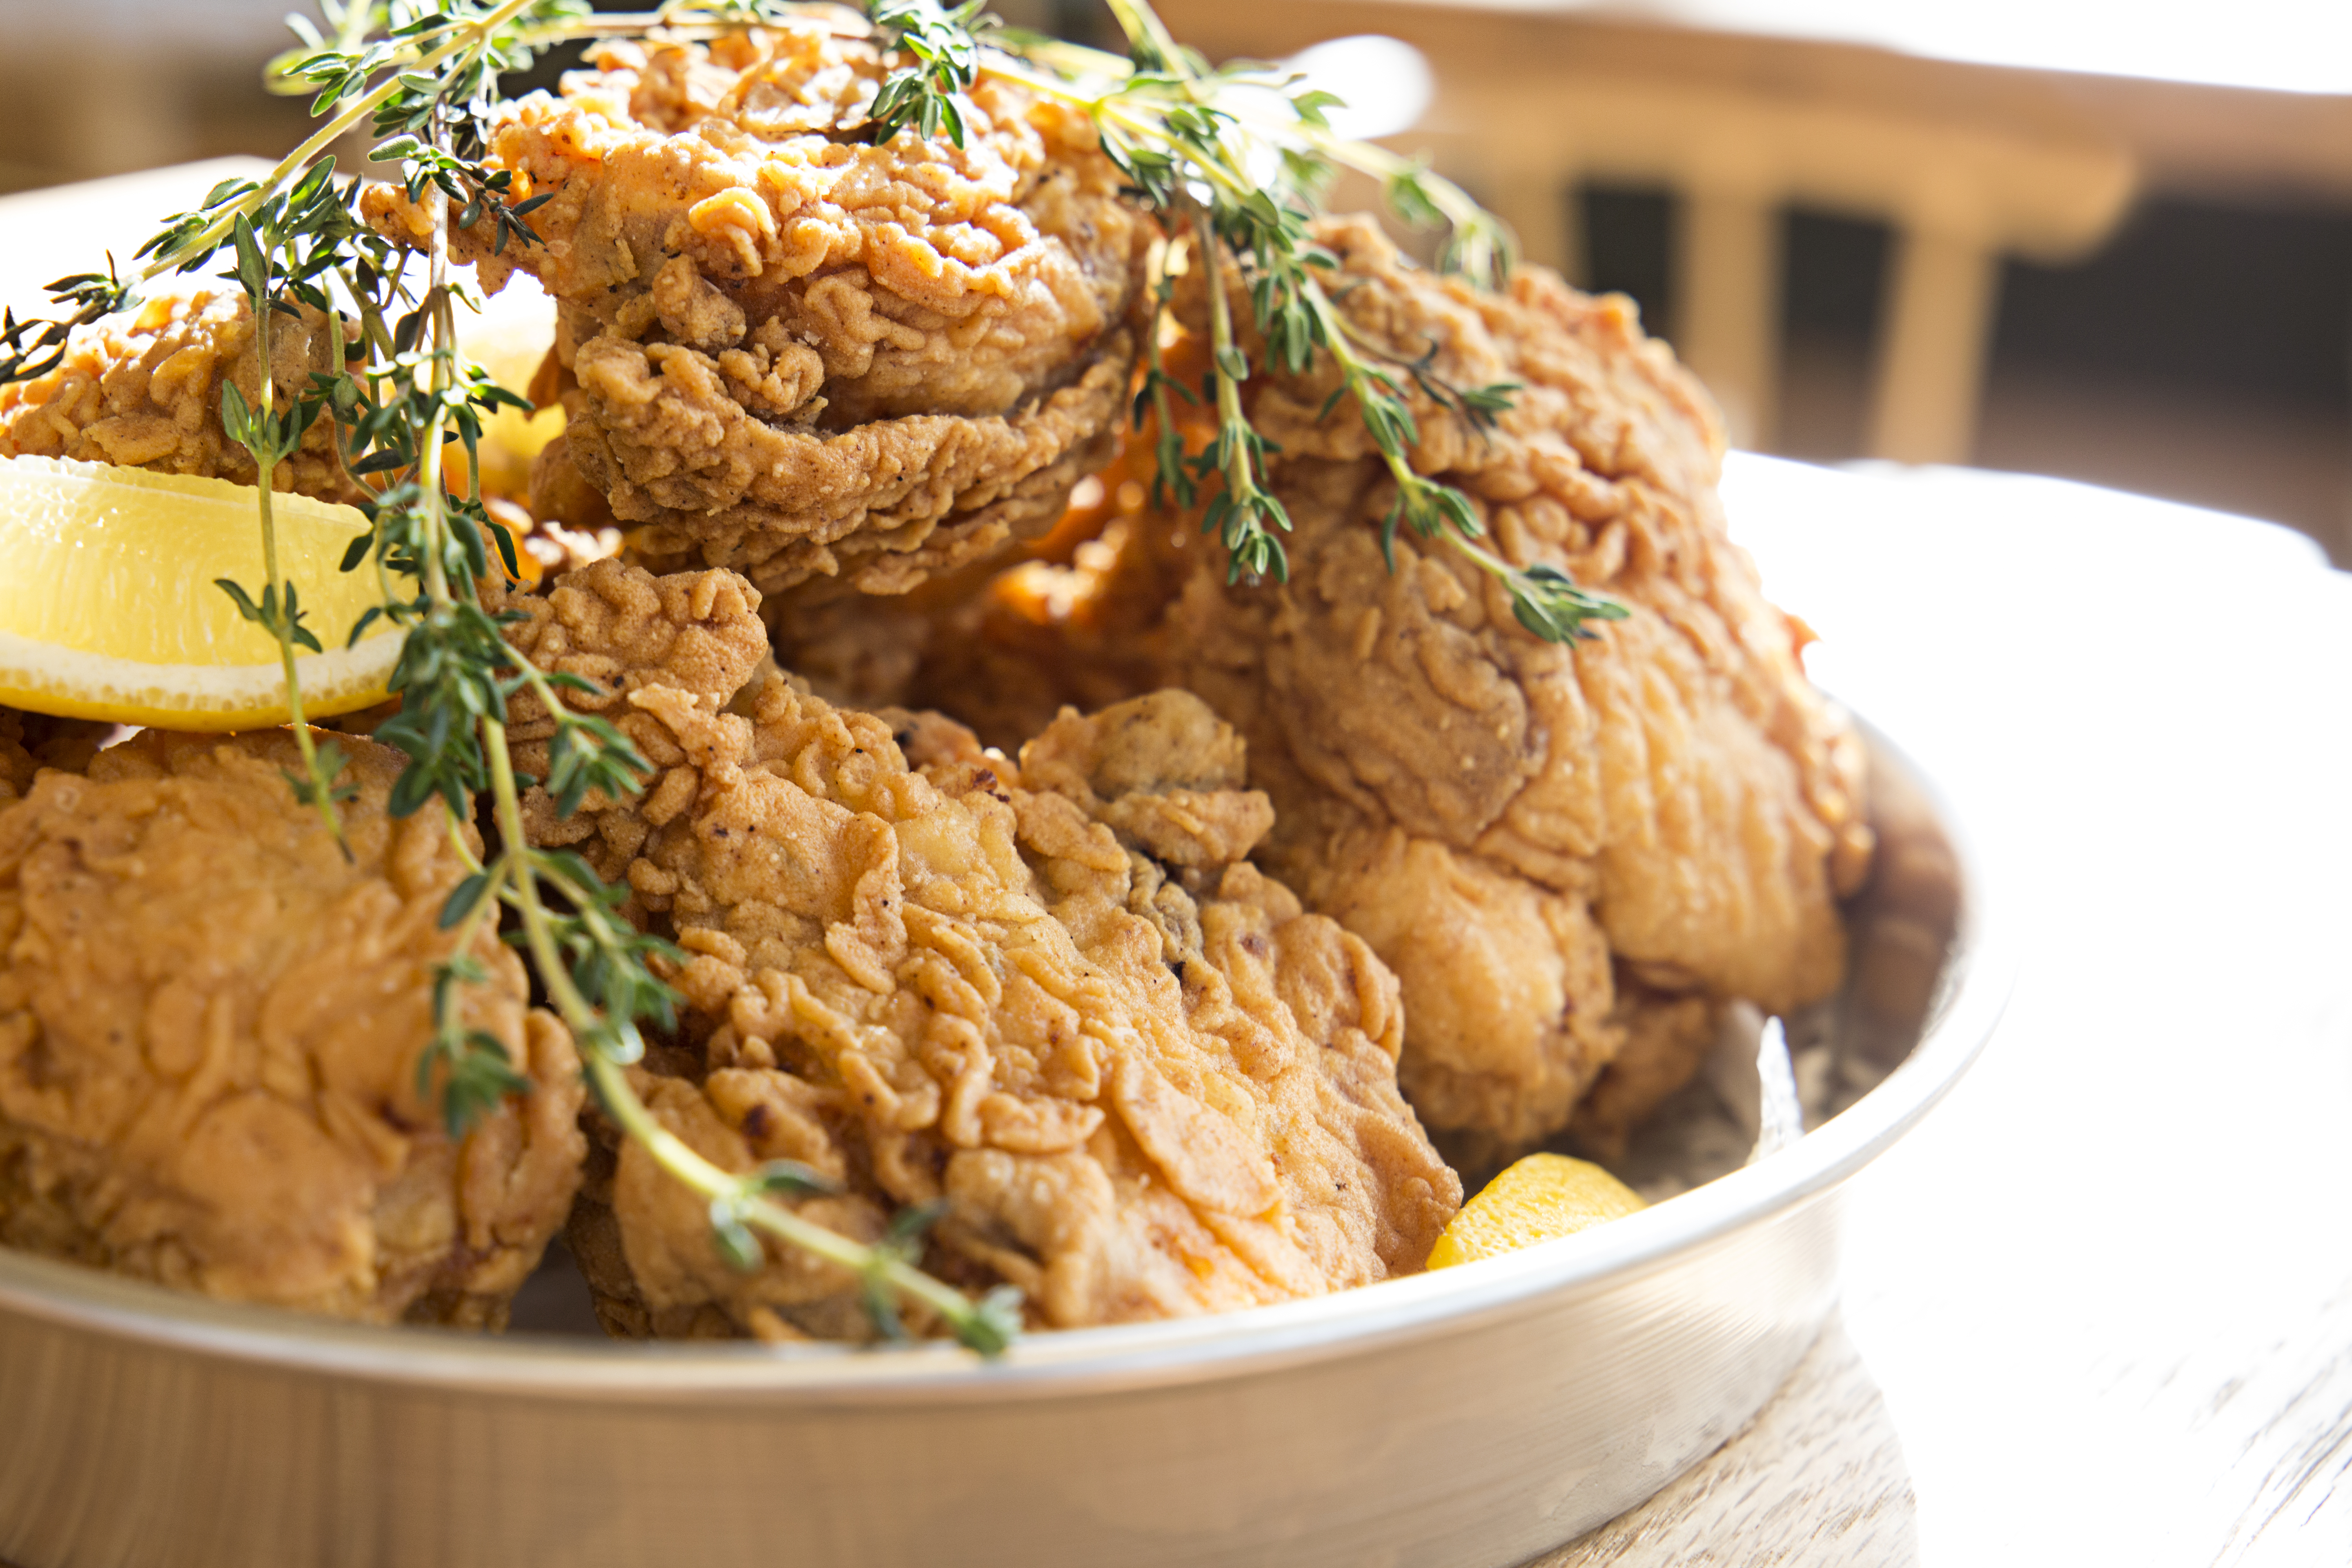 A plate of fried chicken from Southern Proper, a restaurant in Boston’s South End neighborhood. The chicken is adorned with sprigs of thyme and lemon wedges, and is served in a pie tin.